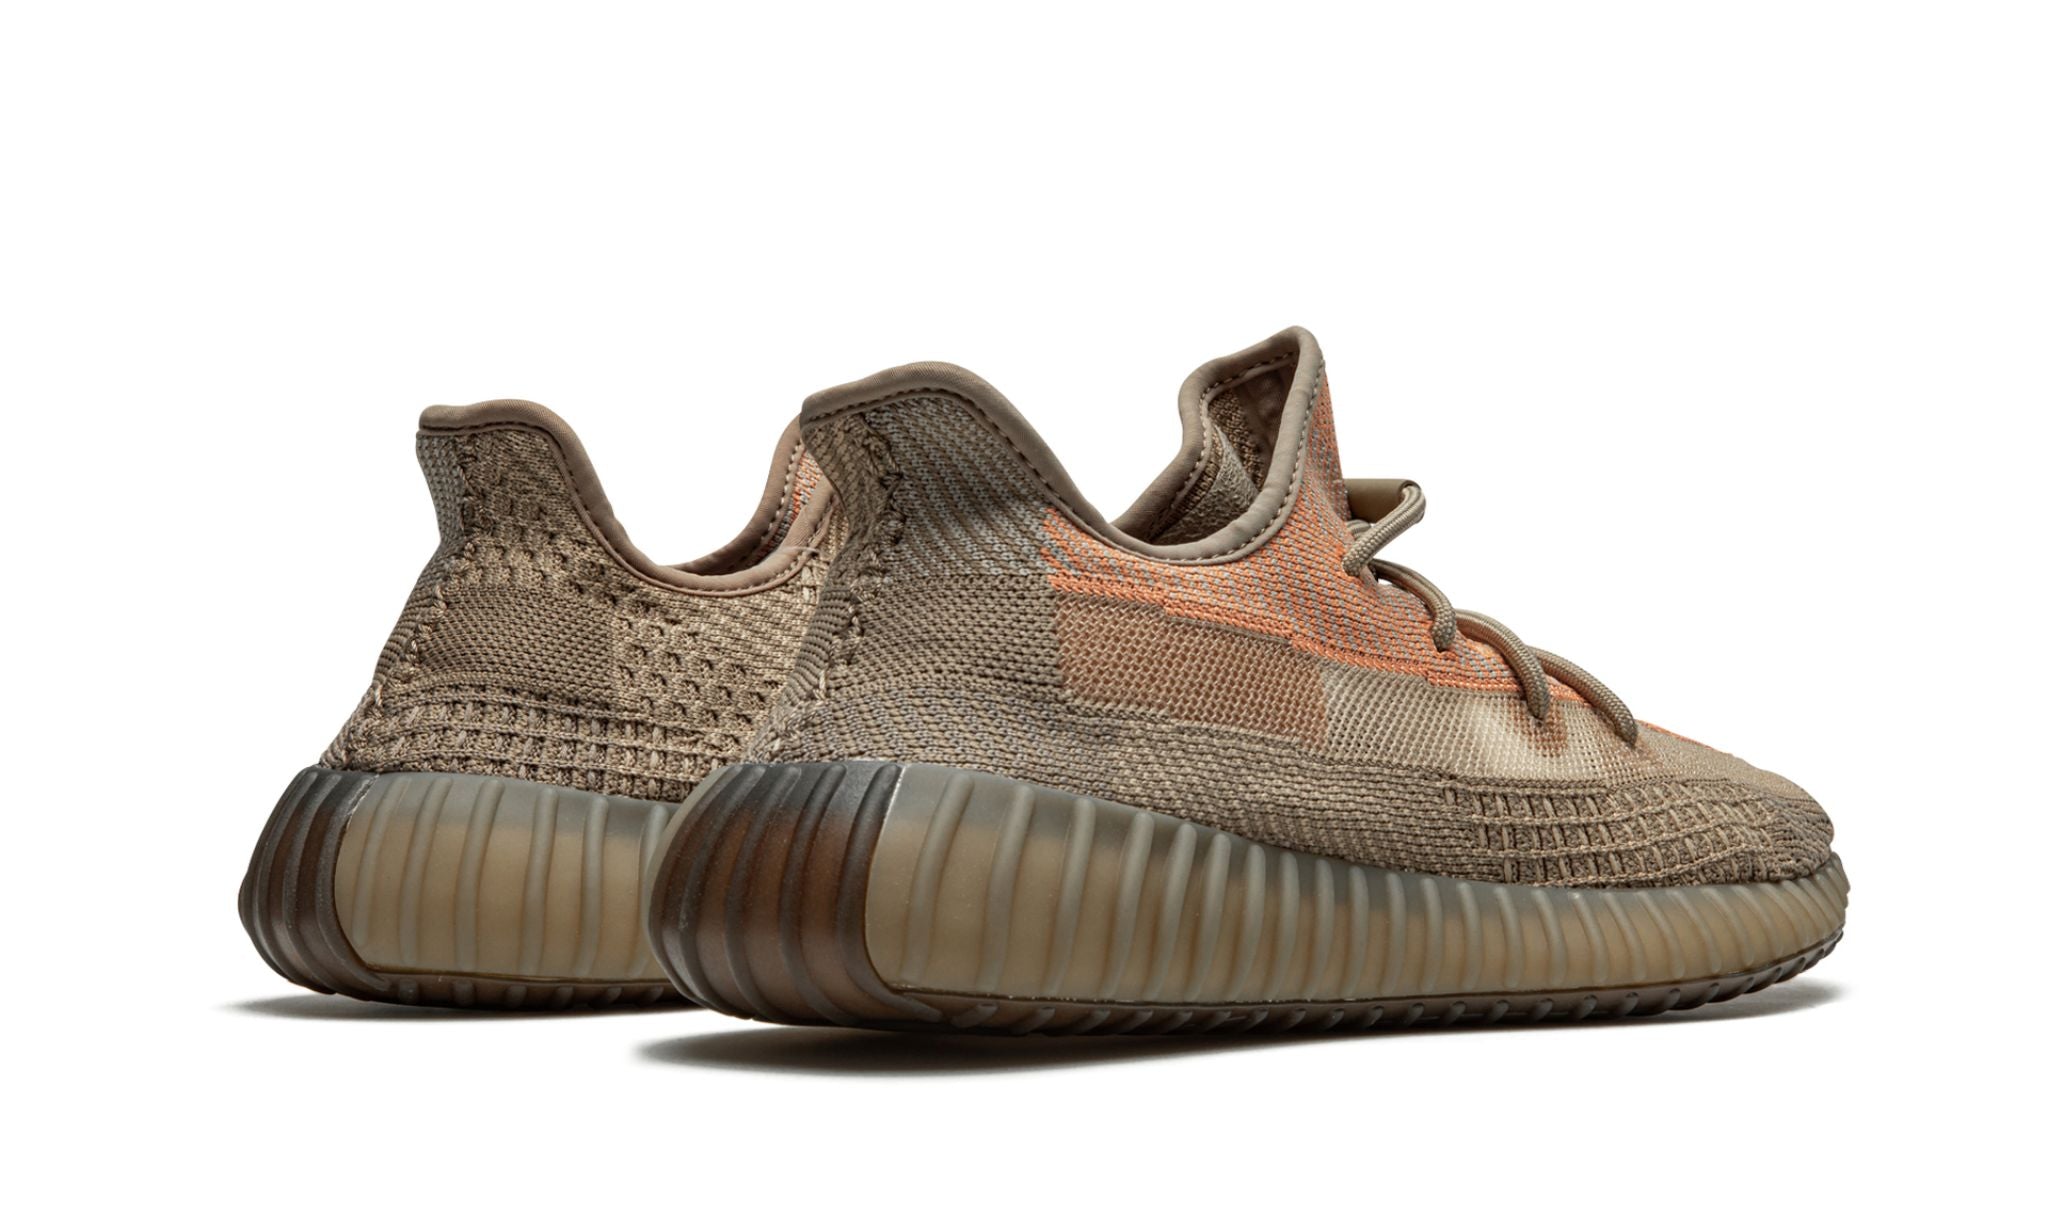 Yeezy Boost 350 V2 ”Sand Taupe”